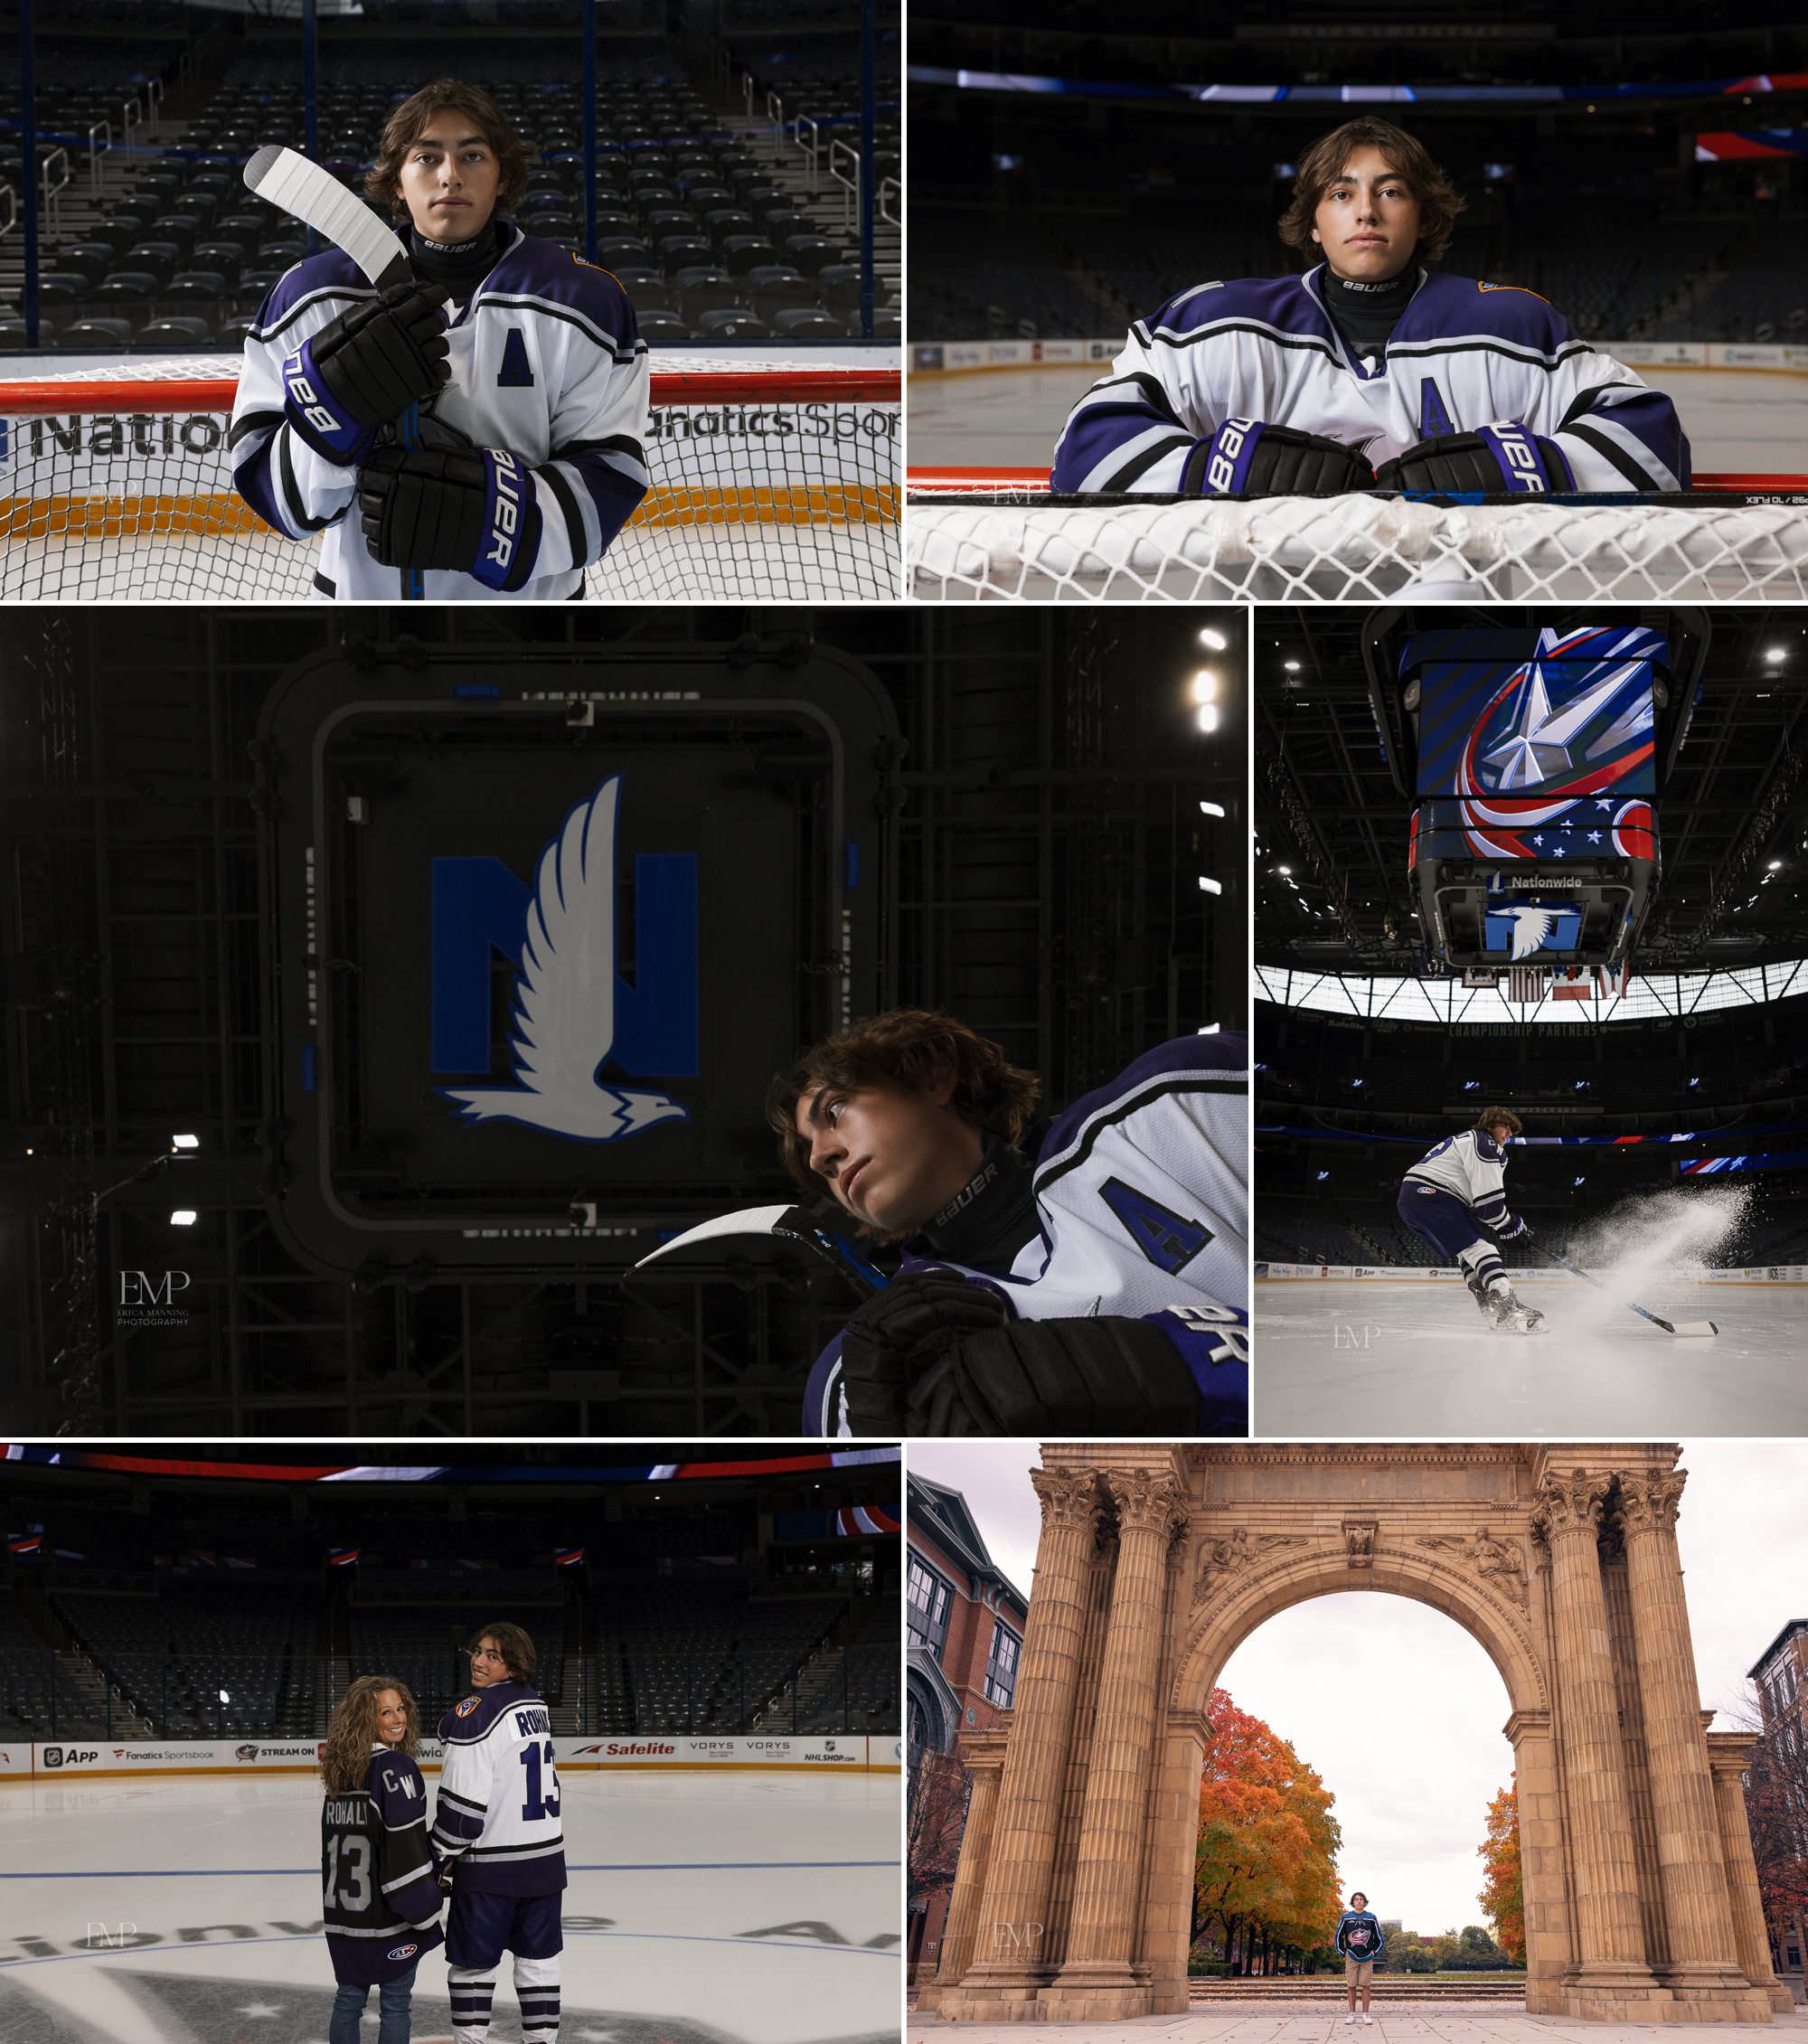 High school senior hockey player on ice in Nationwide Arena